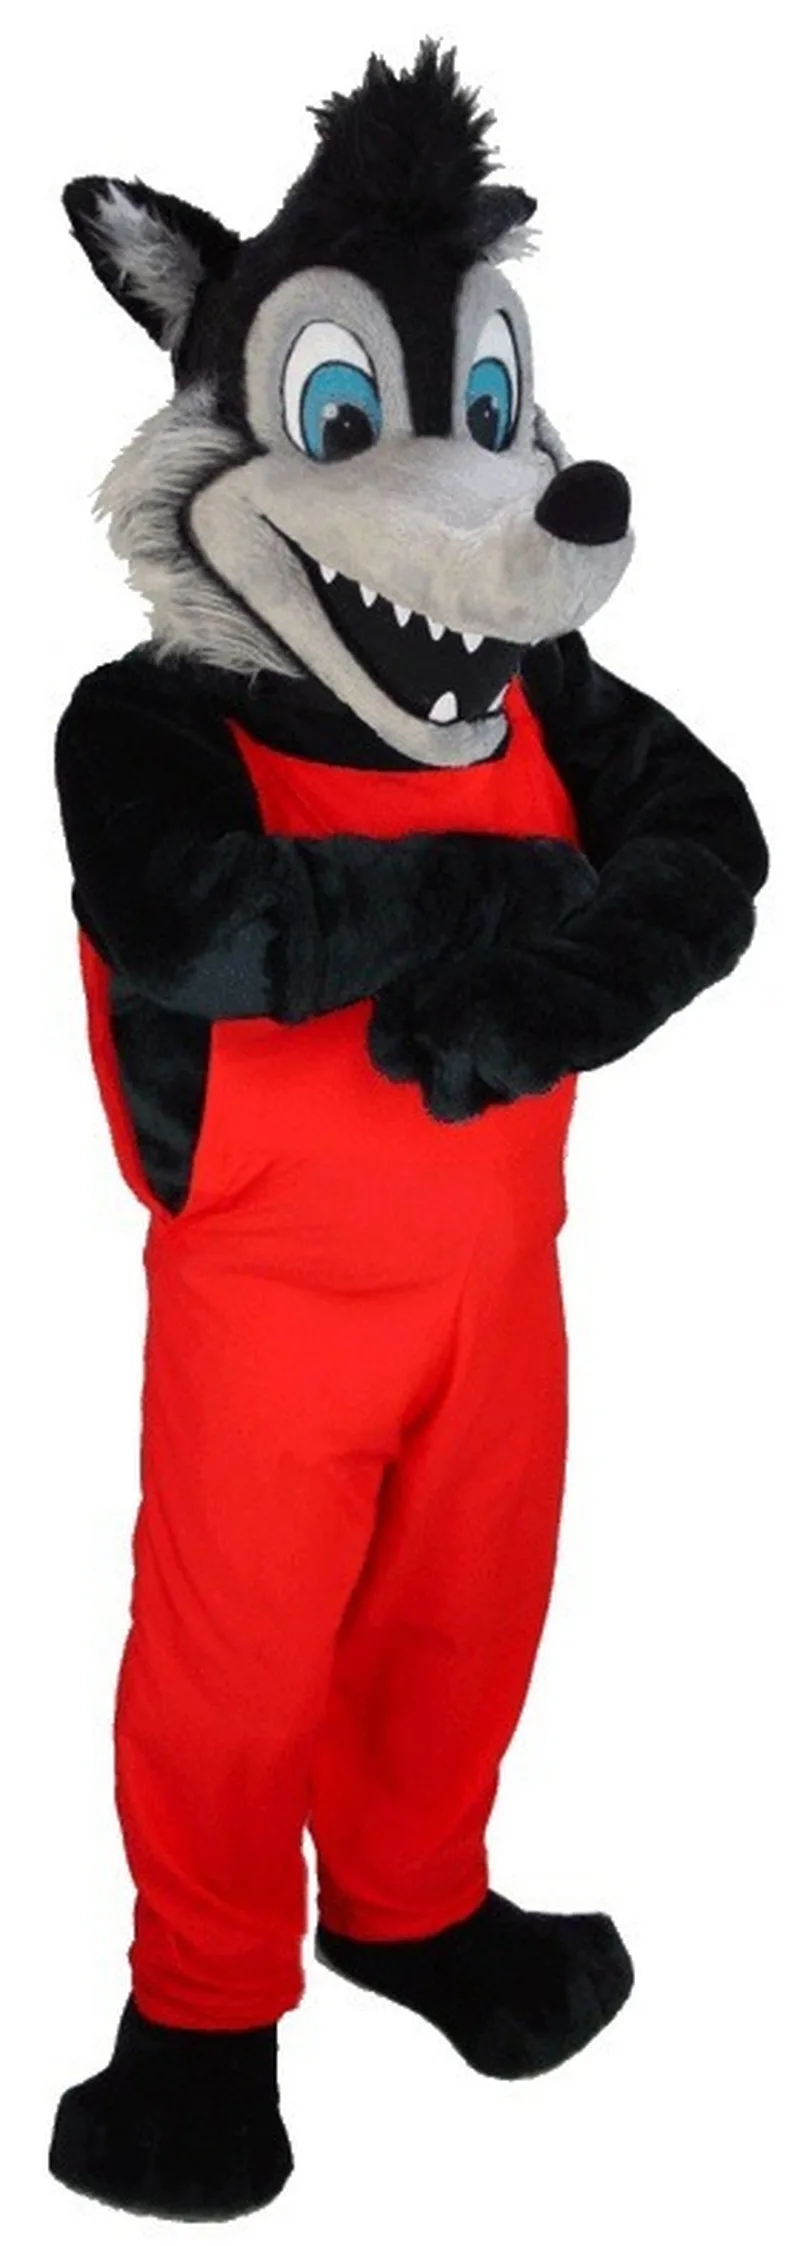 

Hot Selling 2020 Adult Cute Big Bad Wolf Mascot Costume Brand New Pete The Cat Cartoon Character Mascotte Advertising clothing